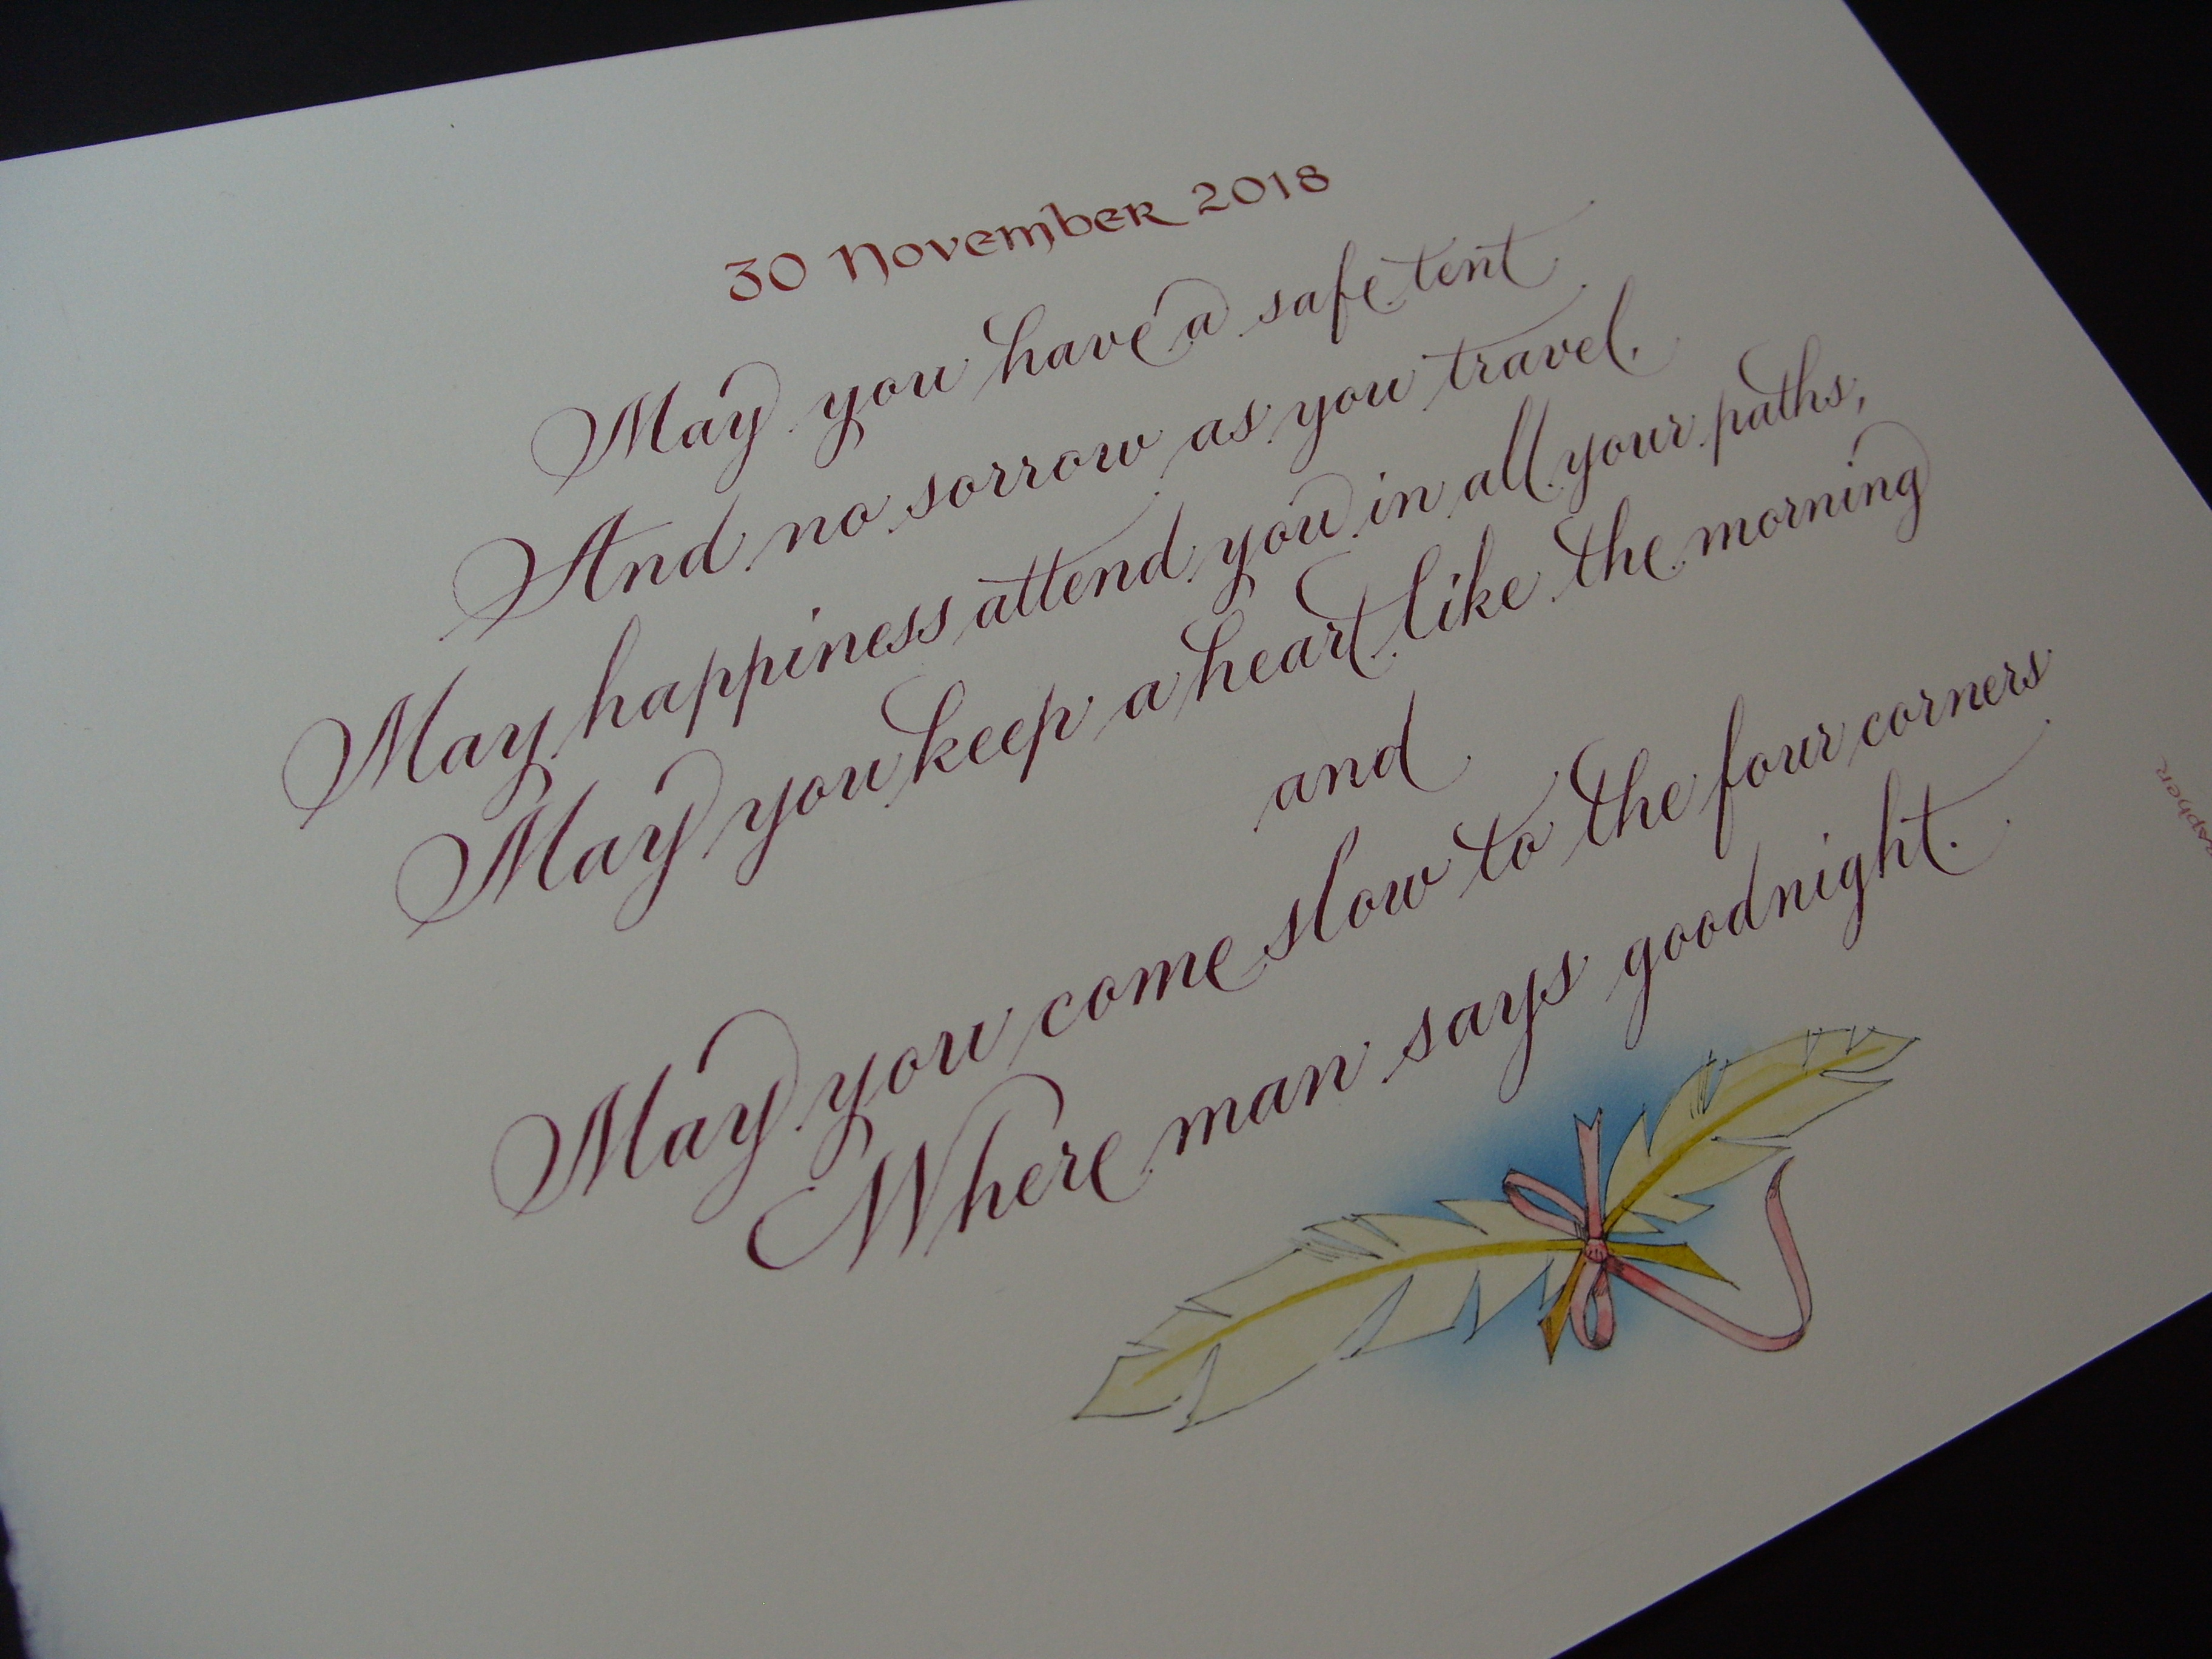 American First-Nation wedding Prayer scribed and illuminated with an interlocking feather motif.